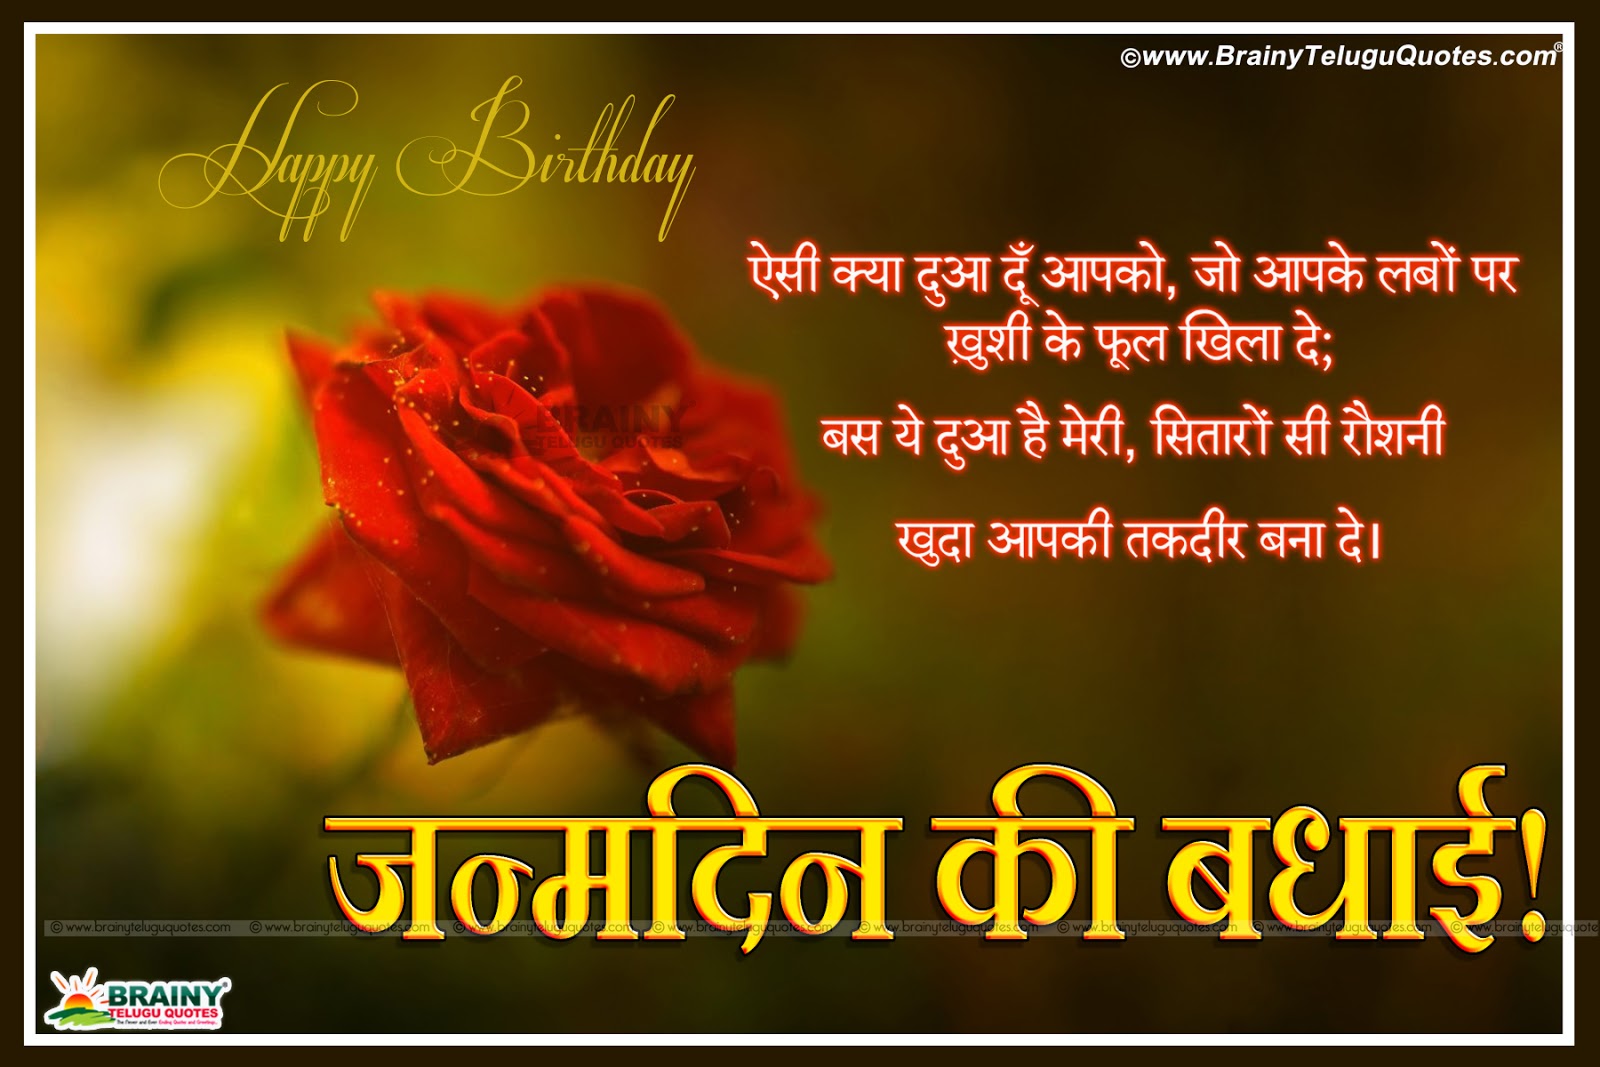 Hindi Birthday Greetings Wishes quotes sms messages for ...